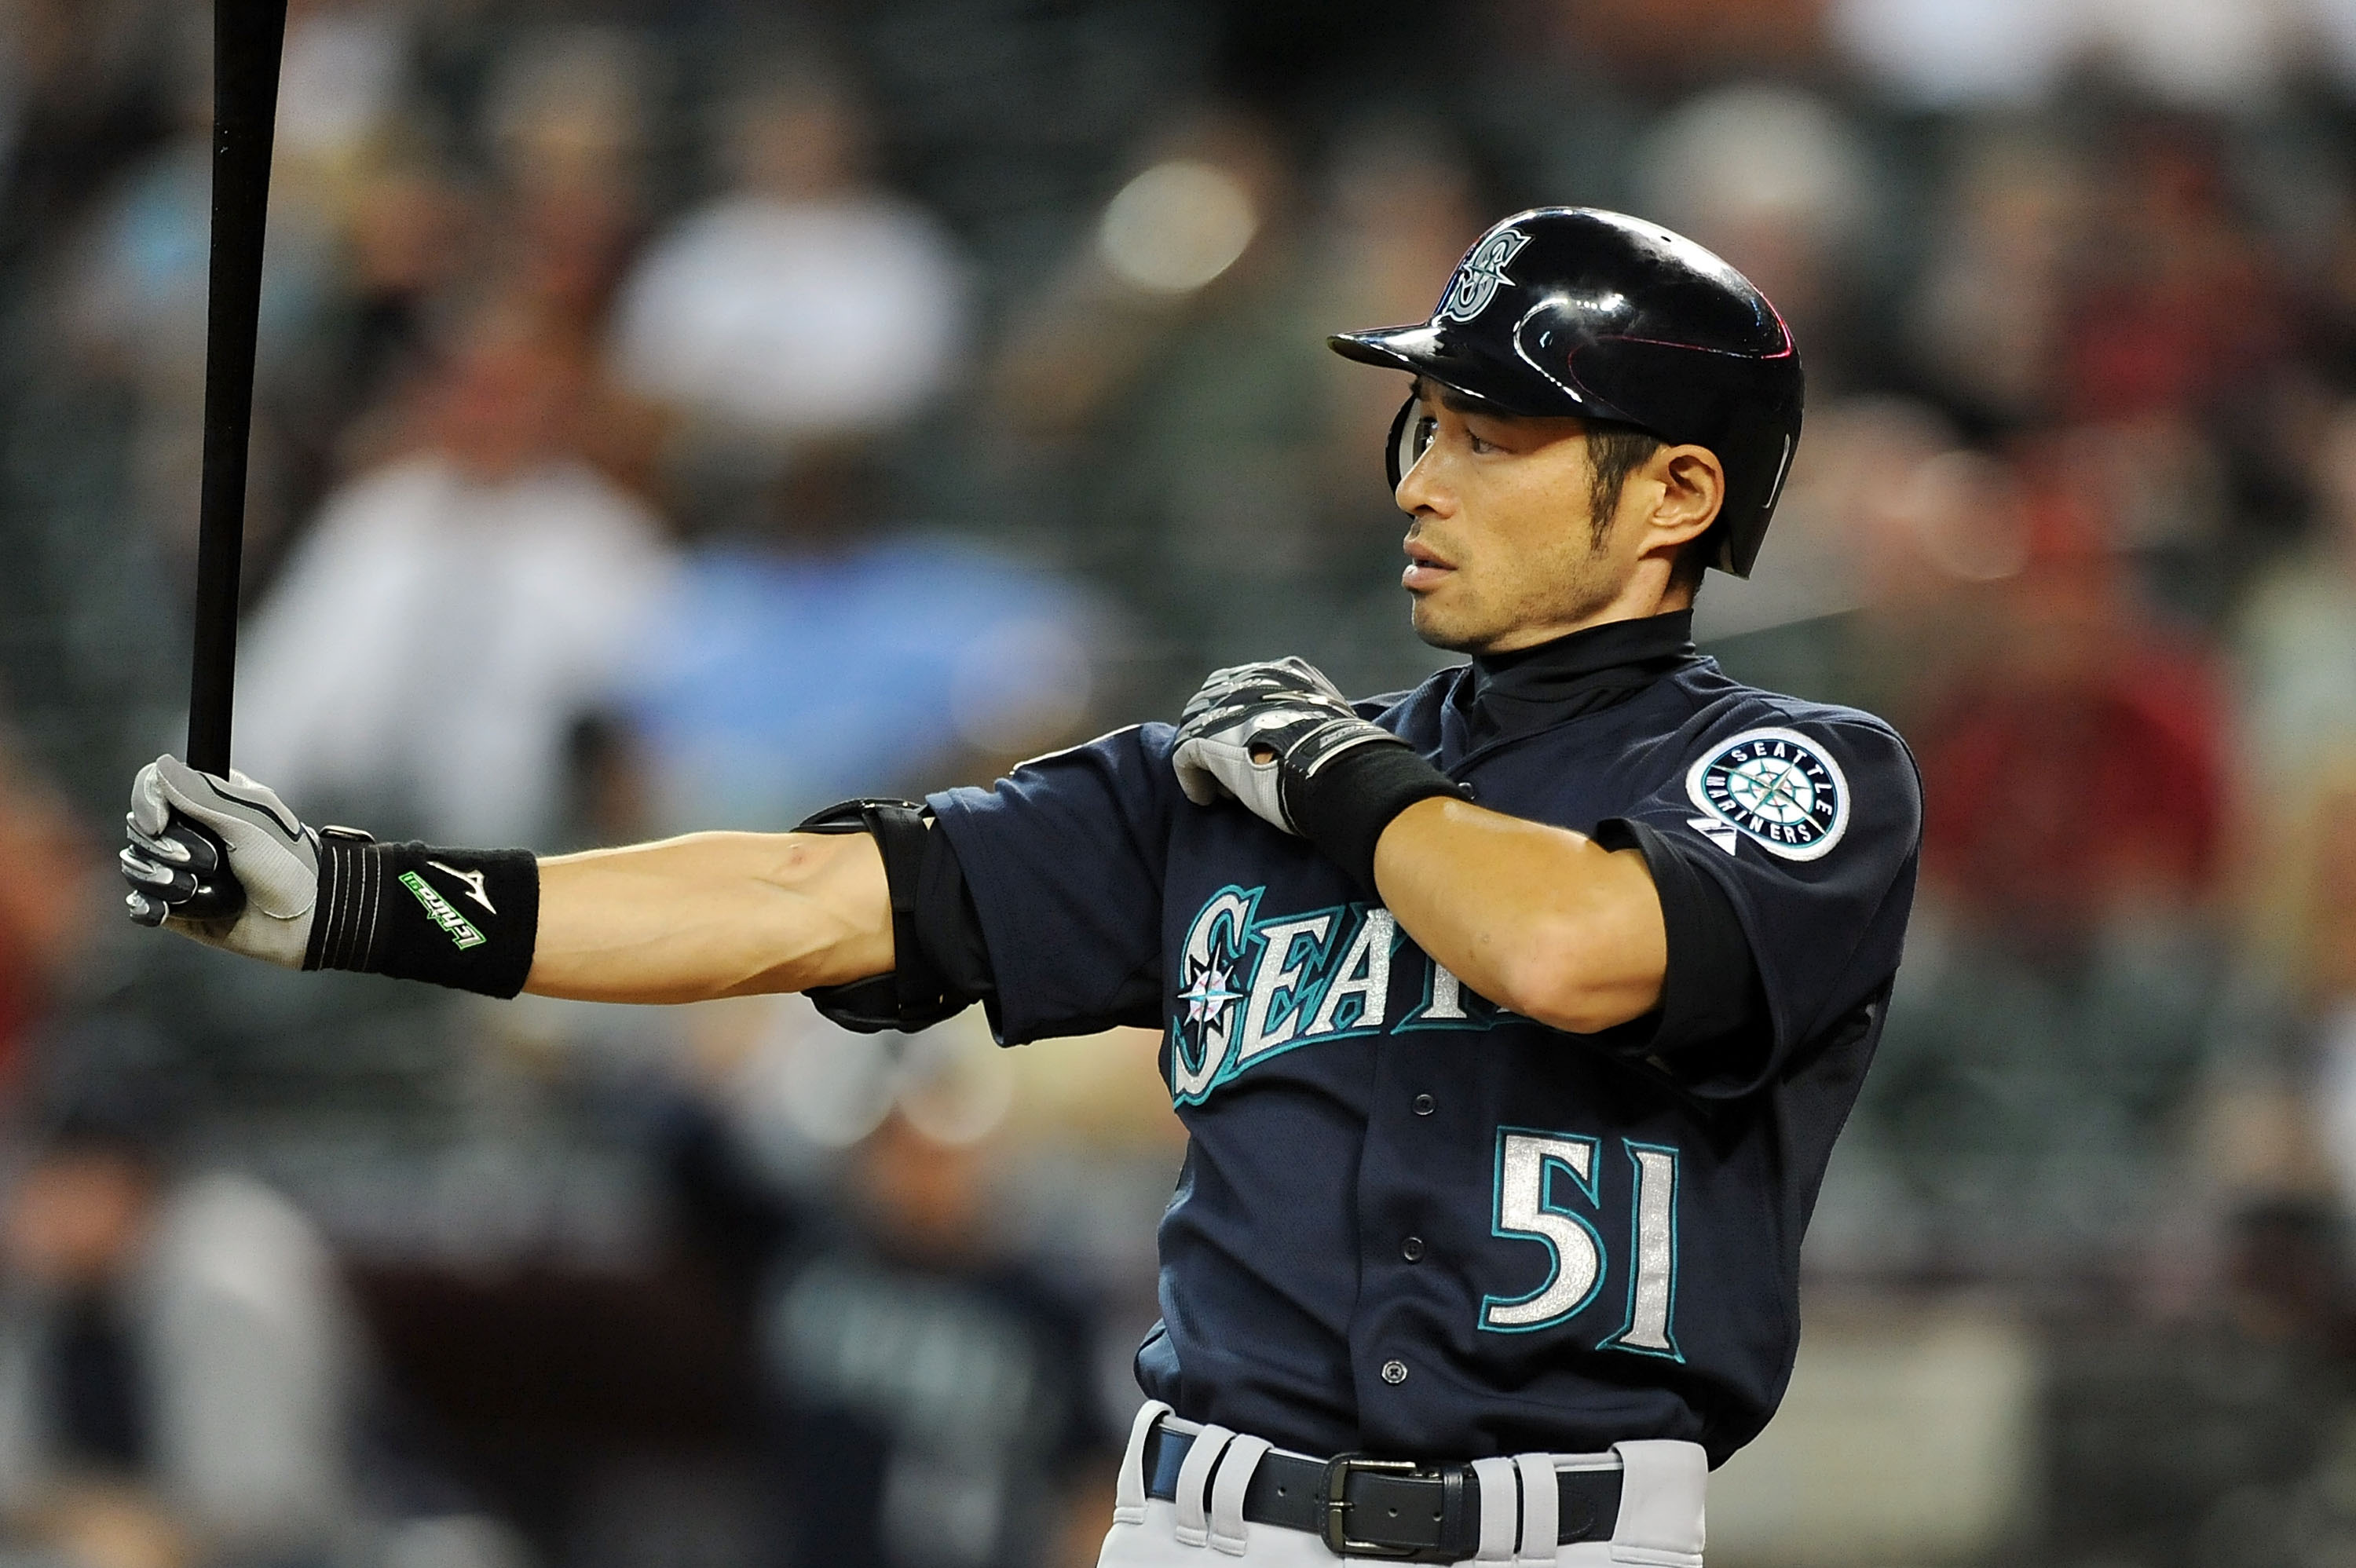 Ichiro to NY Yankees: Why Seattle Mariners Needed to Trade Their Superstar, News, Scores, Highlights, Stats, and Rumors